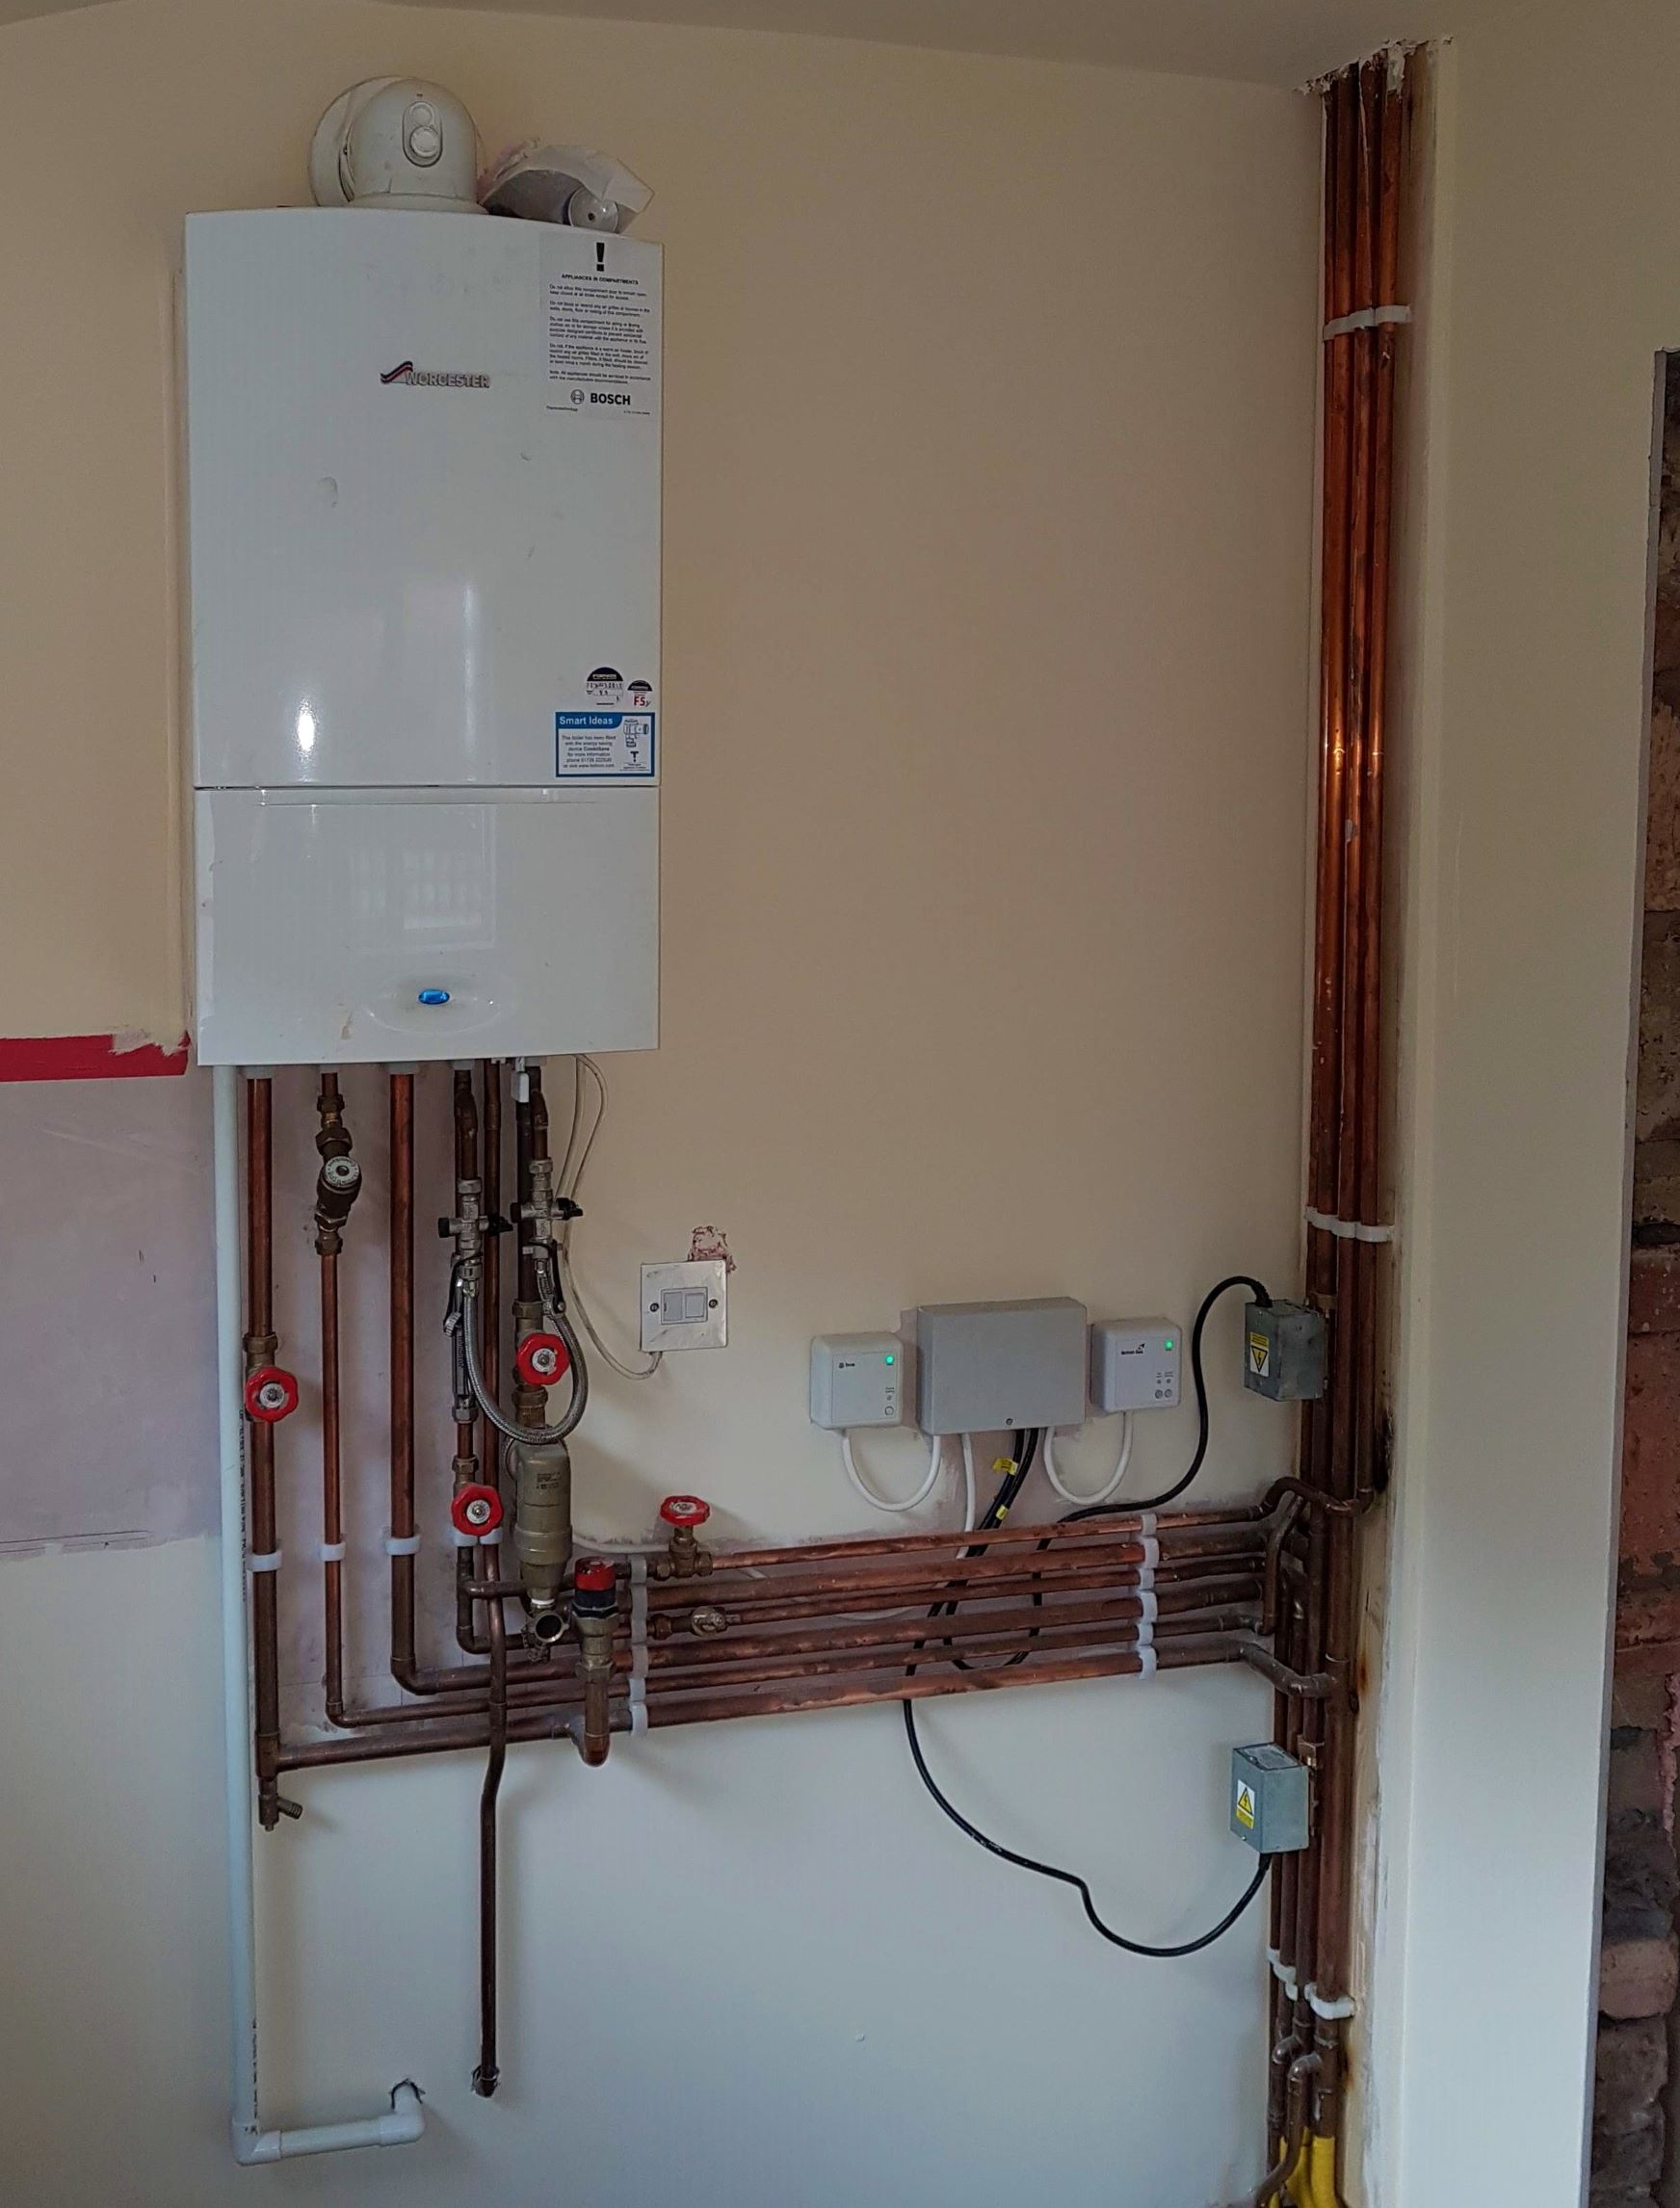 Boiler move and re-pipe following renovation work. System re-designed to include two zones, upstairs and downstairs. Wireless, independent control of zones.